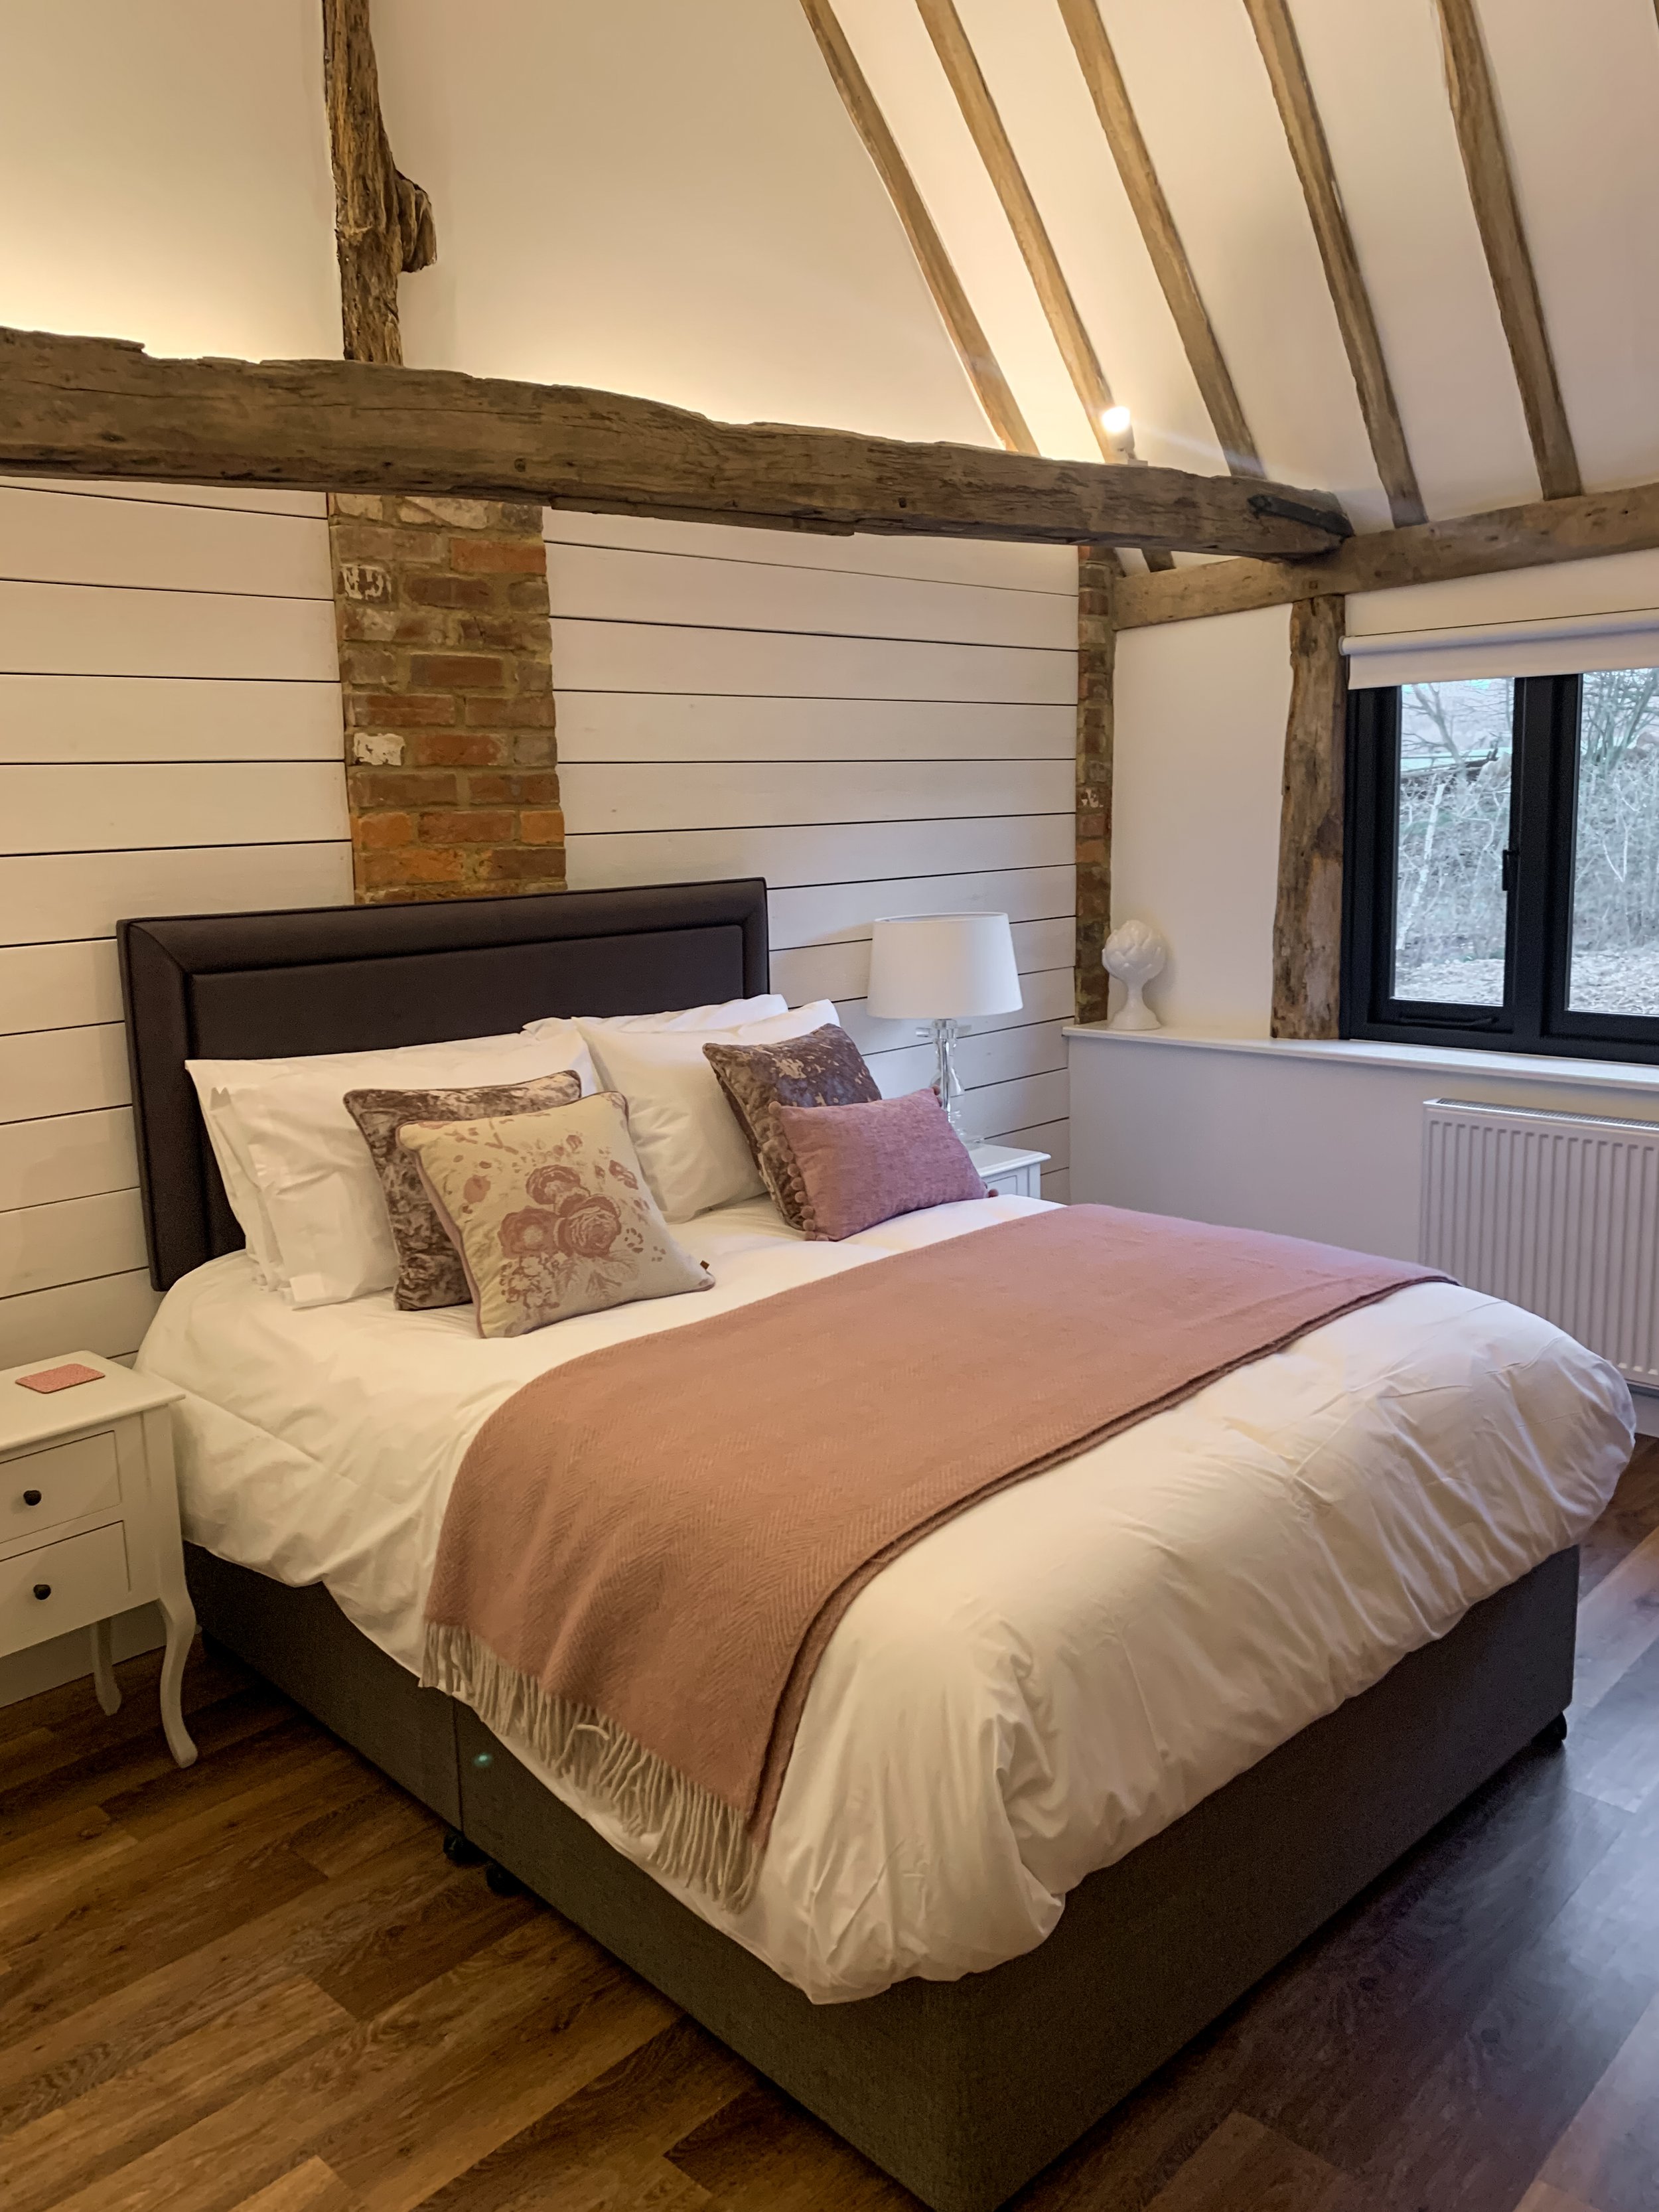 Luxurious King sized beds and home comforts